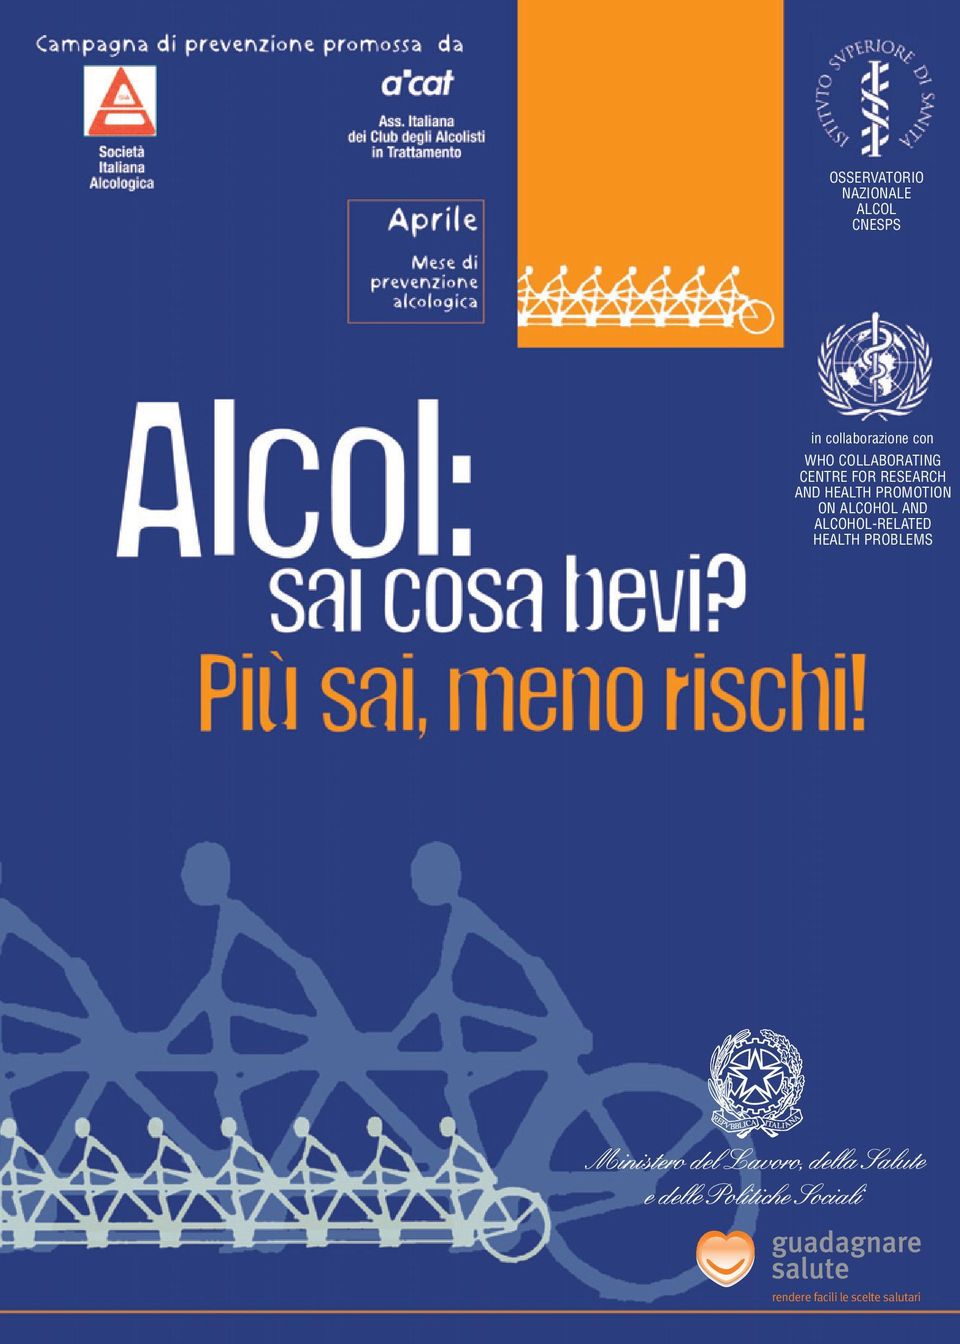 RESEARCH AND HEALTH PROMOTION ON ALCOHOL AND